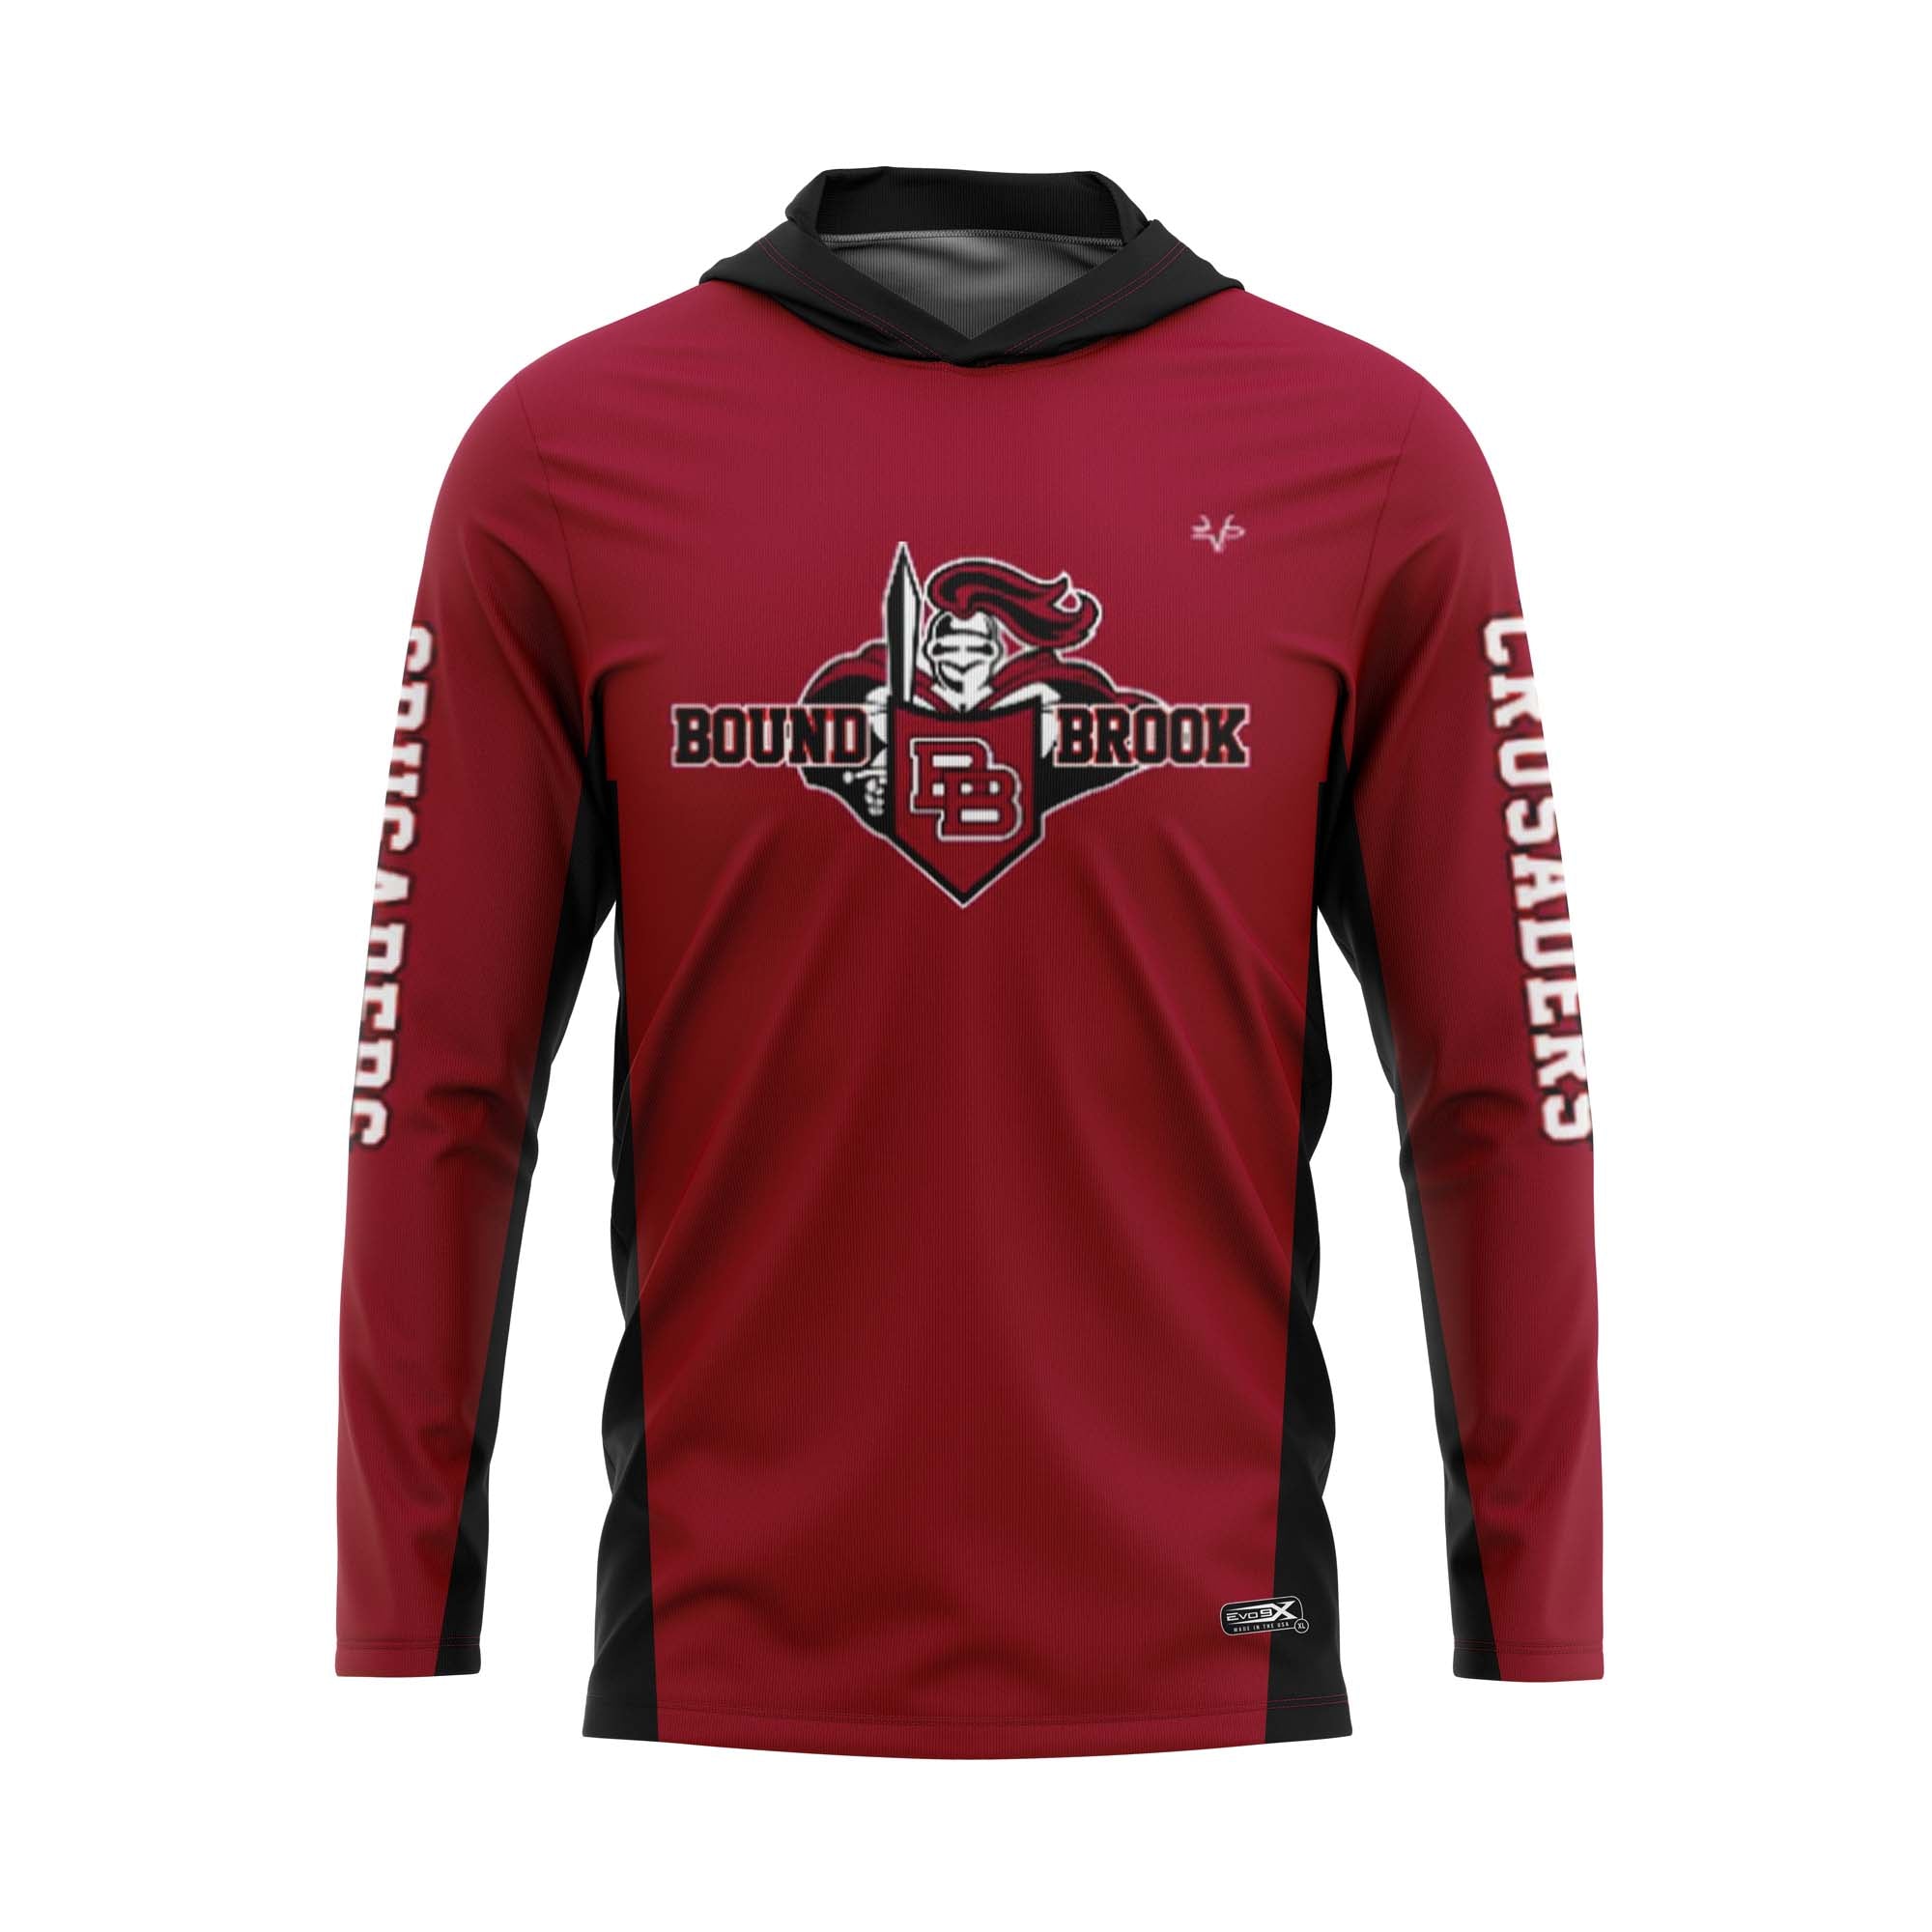 BOUND BROOK Football Sublimated T-Shirt Hoodie